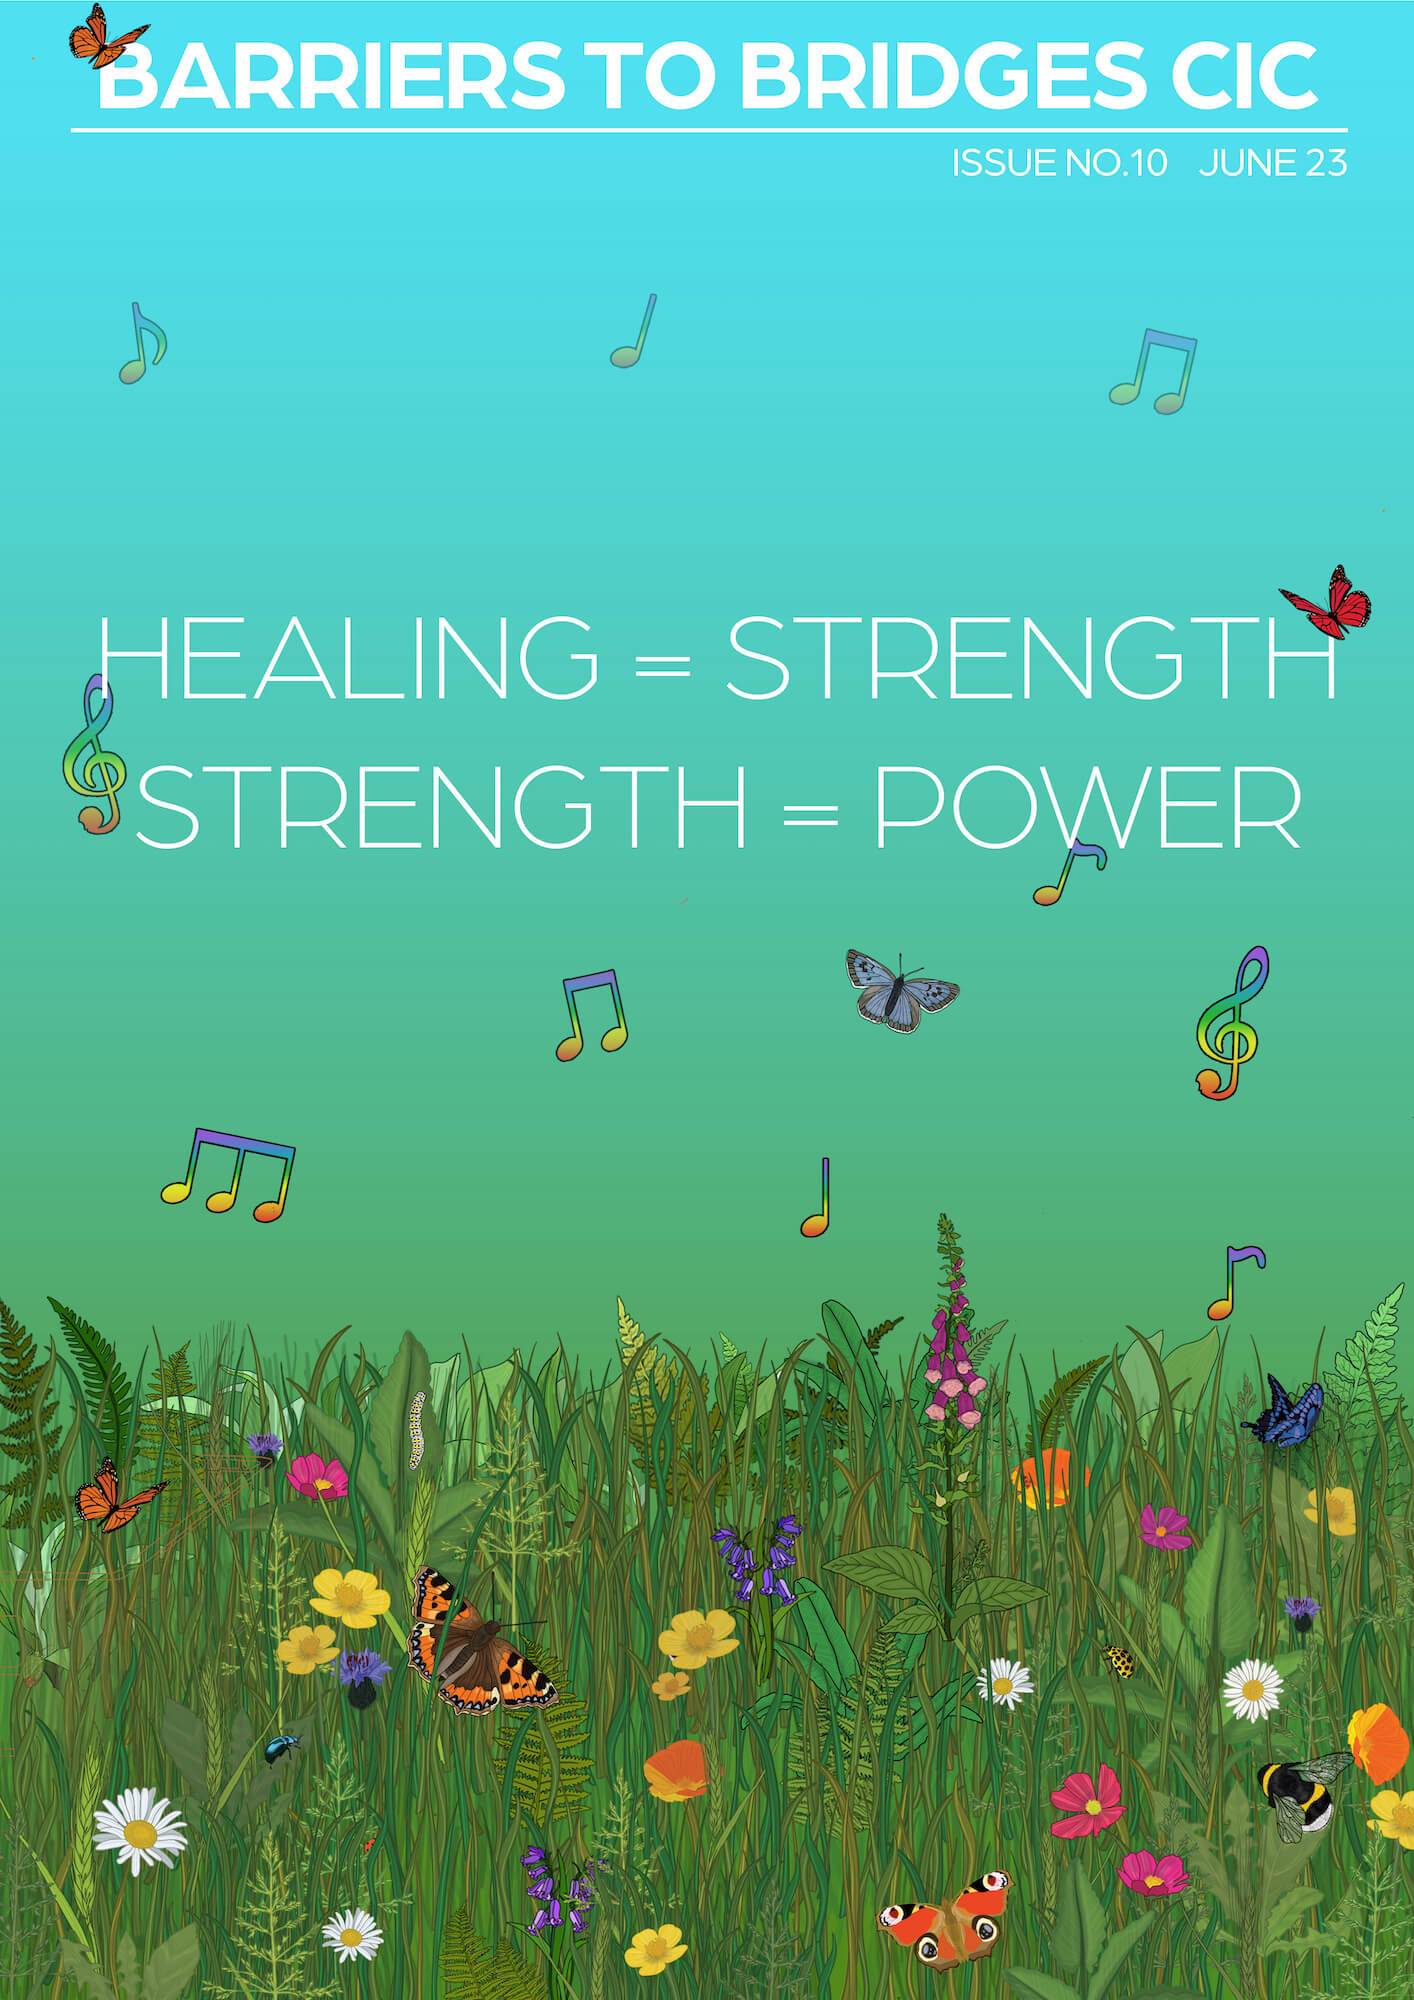 The image shows Barriers to Bridges CIC, Issue No 10, June 23. With the words Healing = Strength. Strength = Power. A background illustration with grass, wildflowers, insects including butterflies and bees, and musical notes and treble clefs.